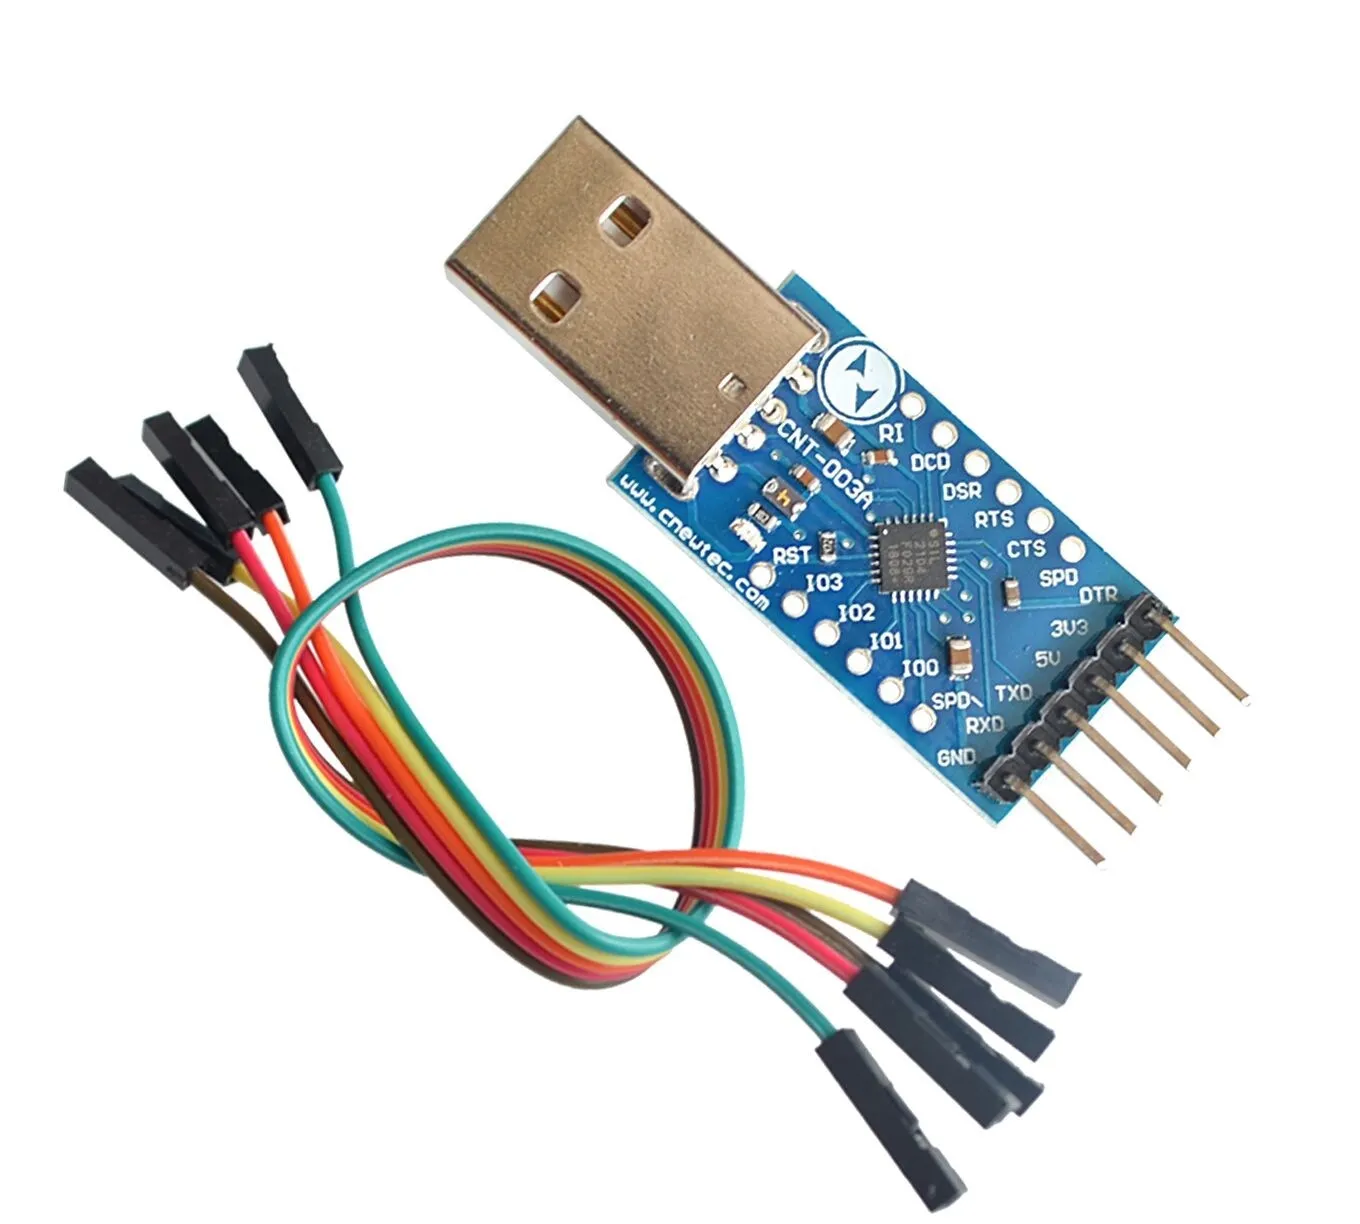 

USB 2.0 To TTL UART 6PIN Module Serial Converter CP2104 For STC PRGMR Replace CP2102 With Dupont Cables